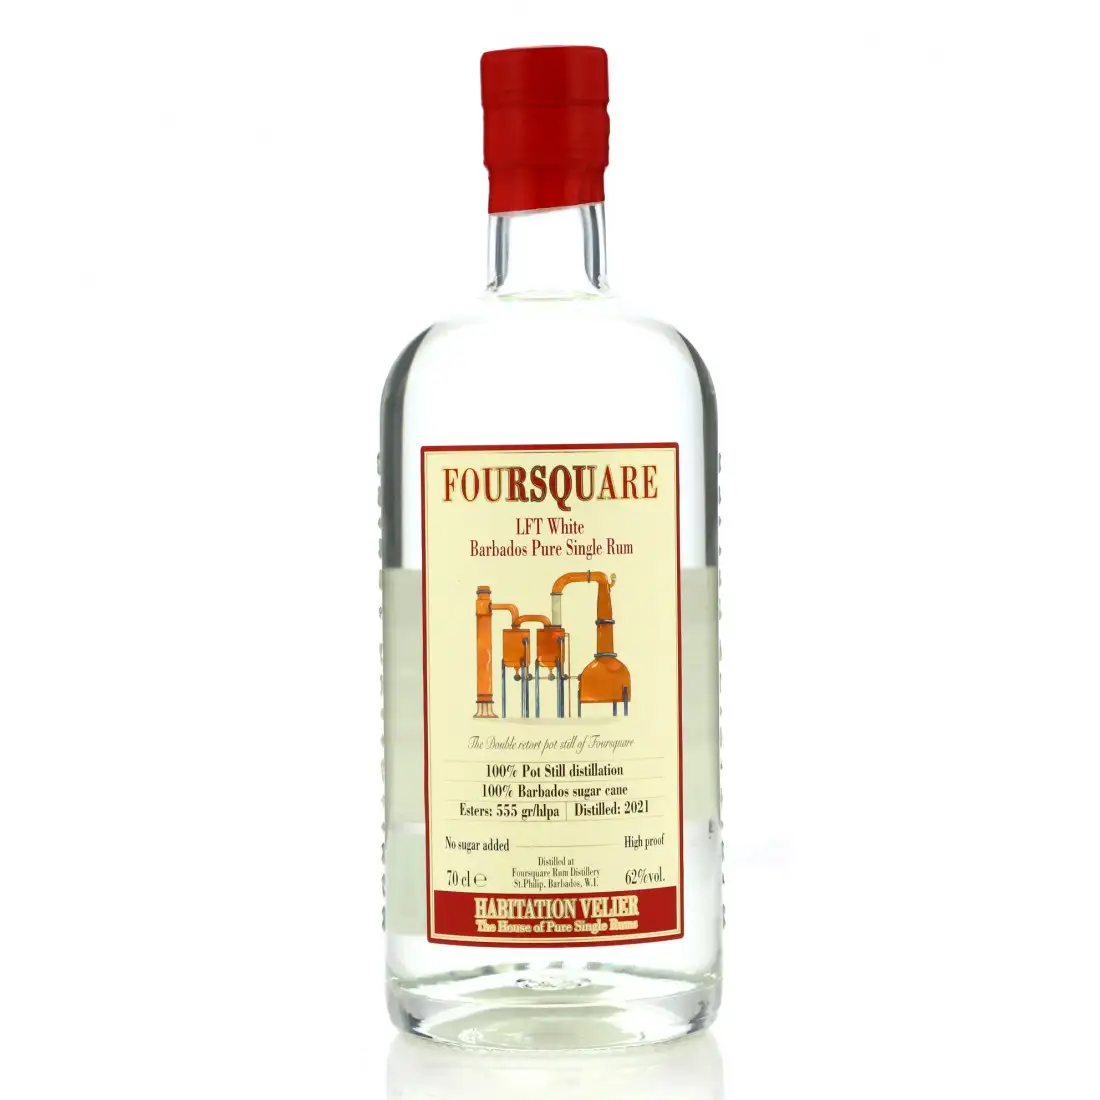 Image of the front of the bottle of the rum LFT White